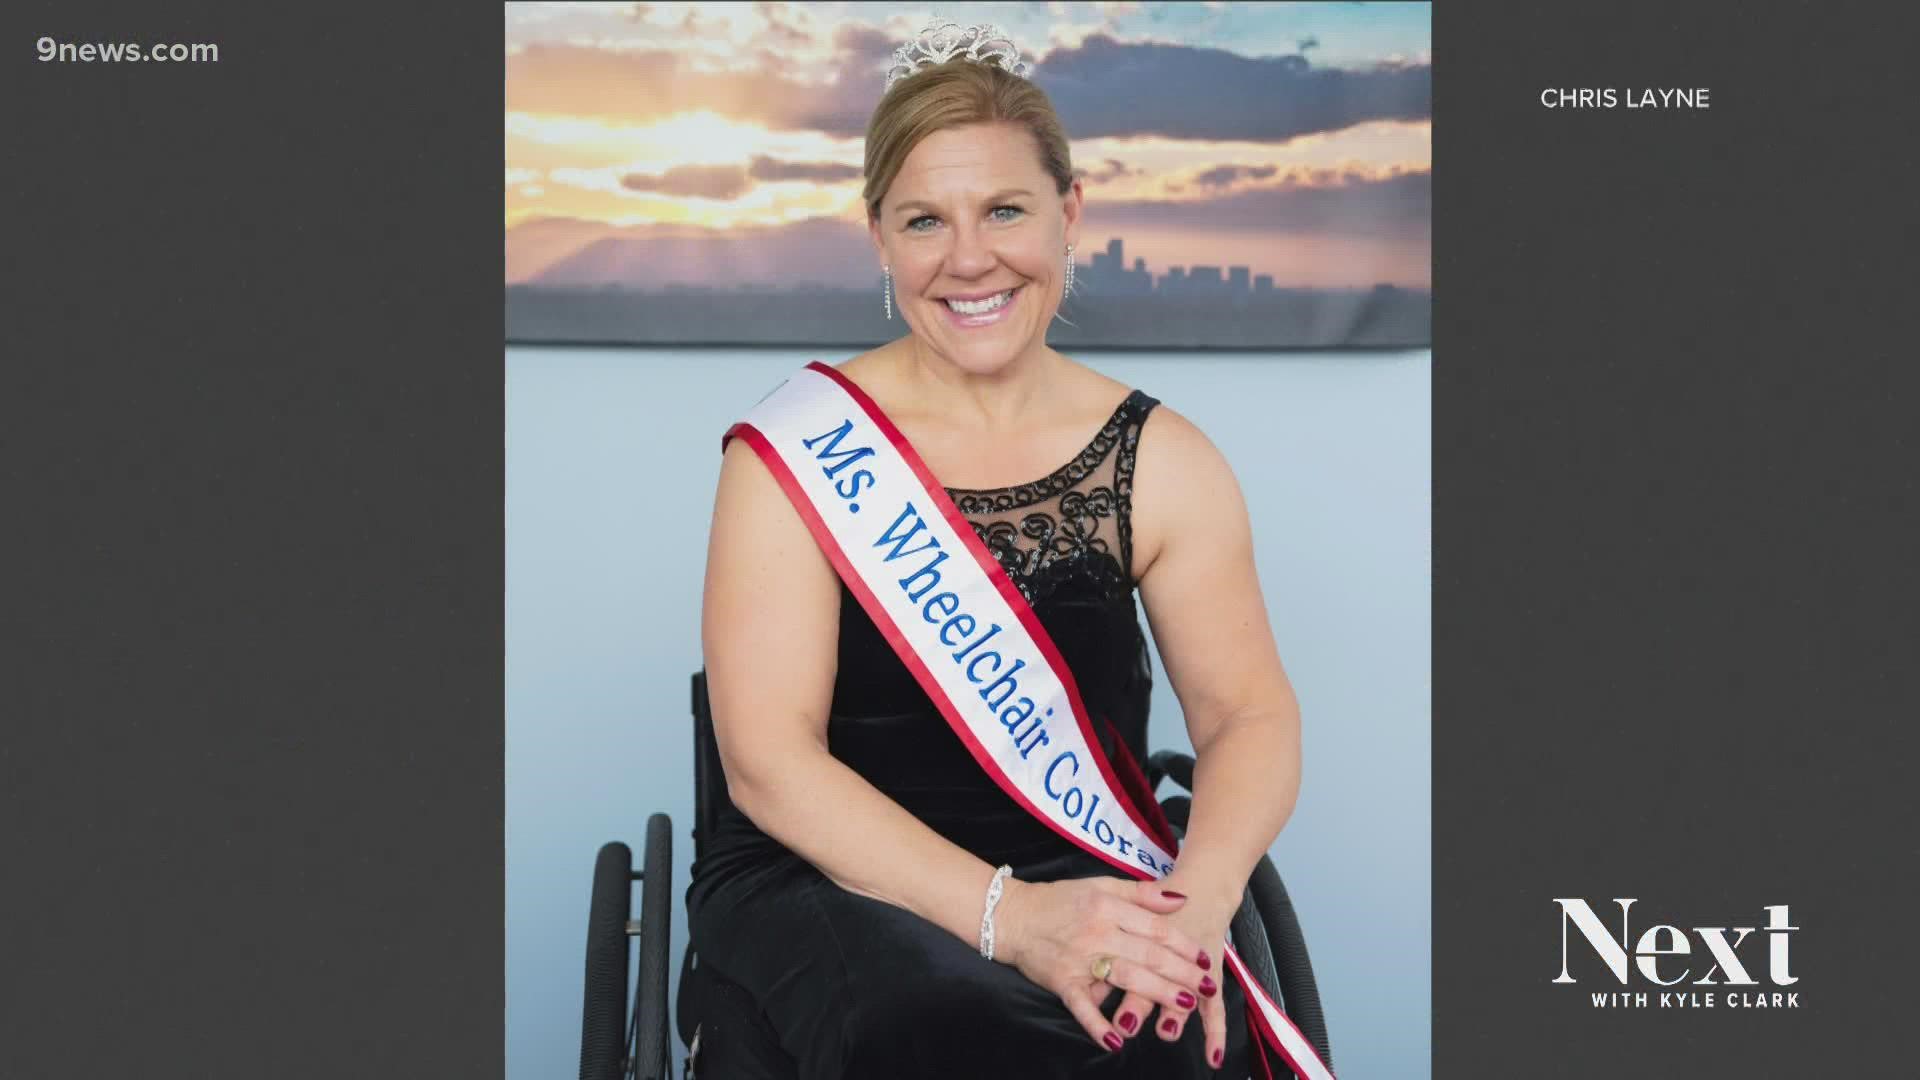 Ms. Wheelchair Colorado, Chris Layne, competed on a national stage for the title of Ms. Wheelchair America. She barely missed the crown, but that won't stop her work